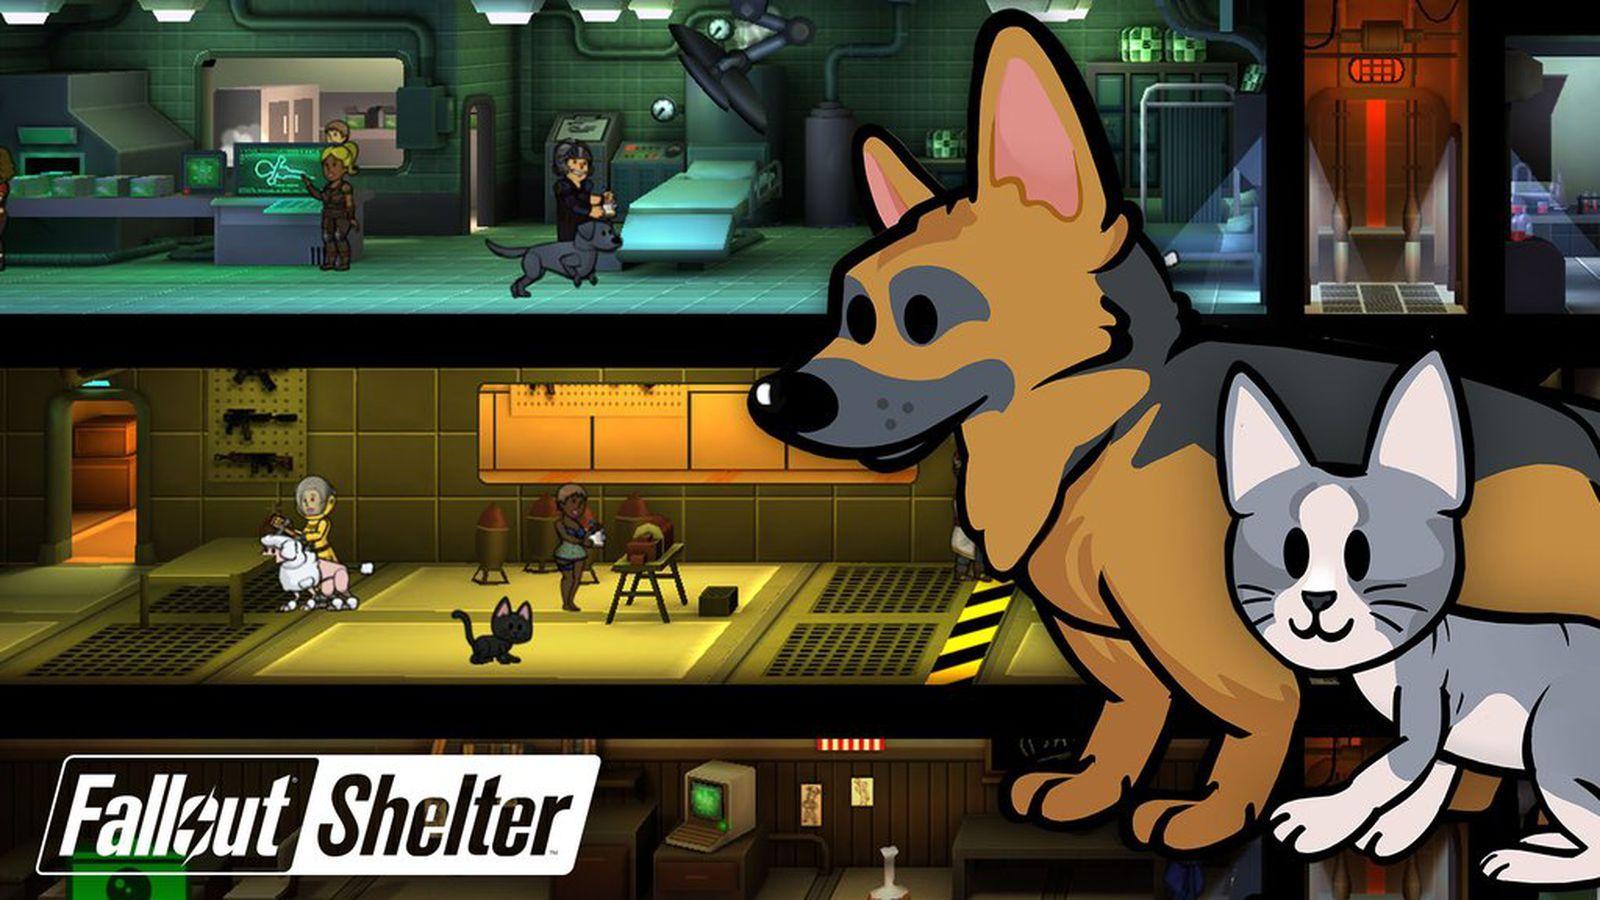 Fallout Shelter introduces Dogmeat and other pets to the vault